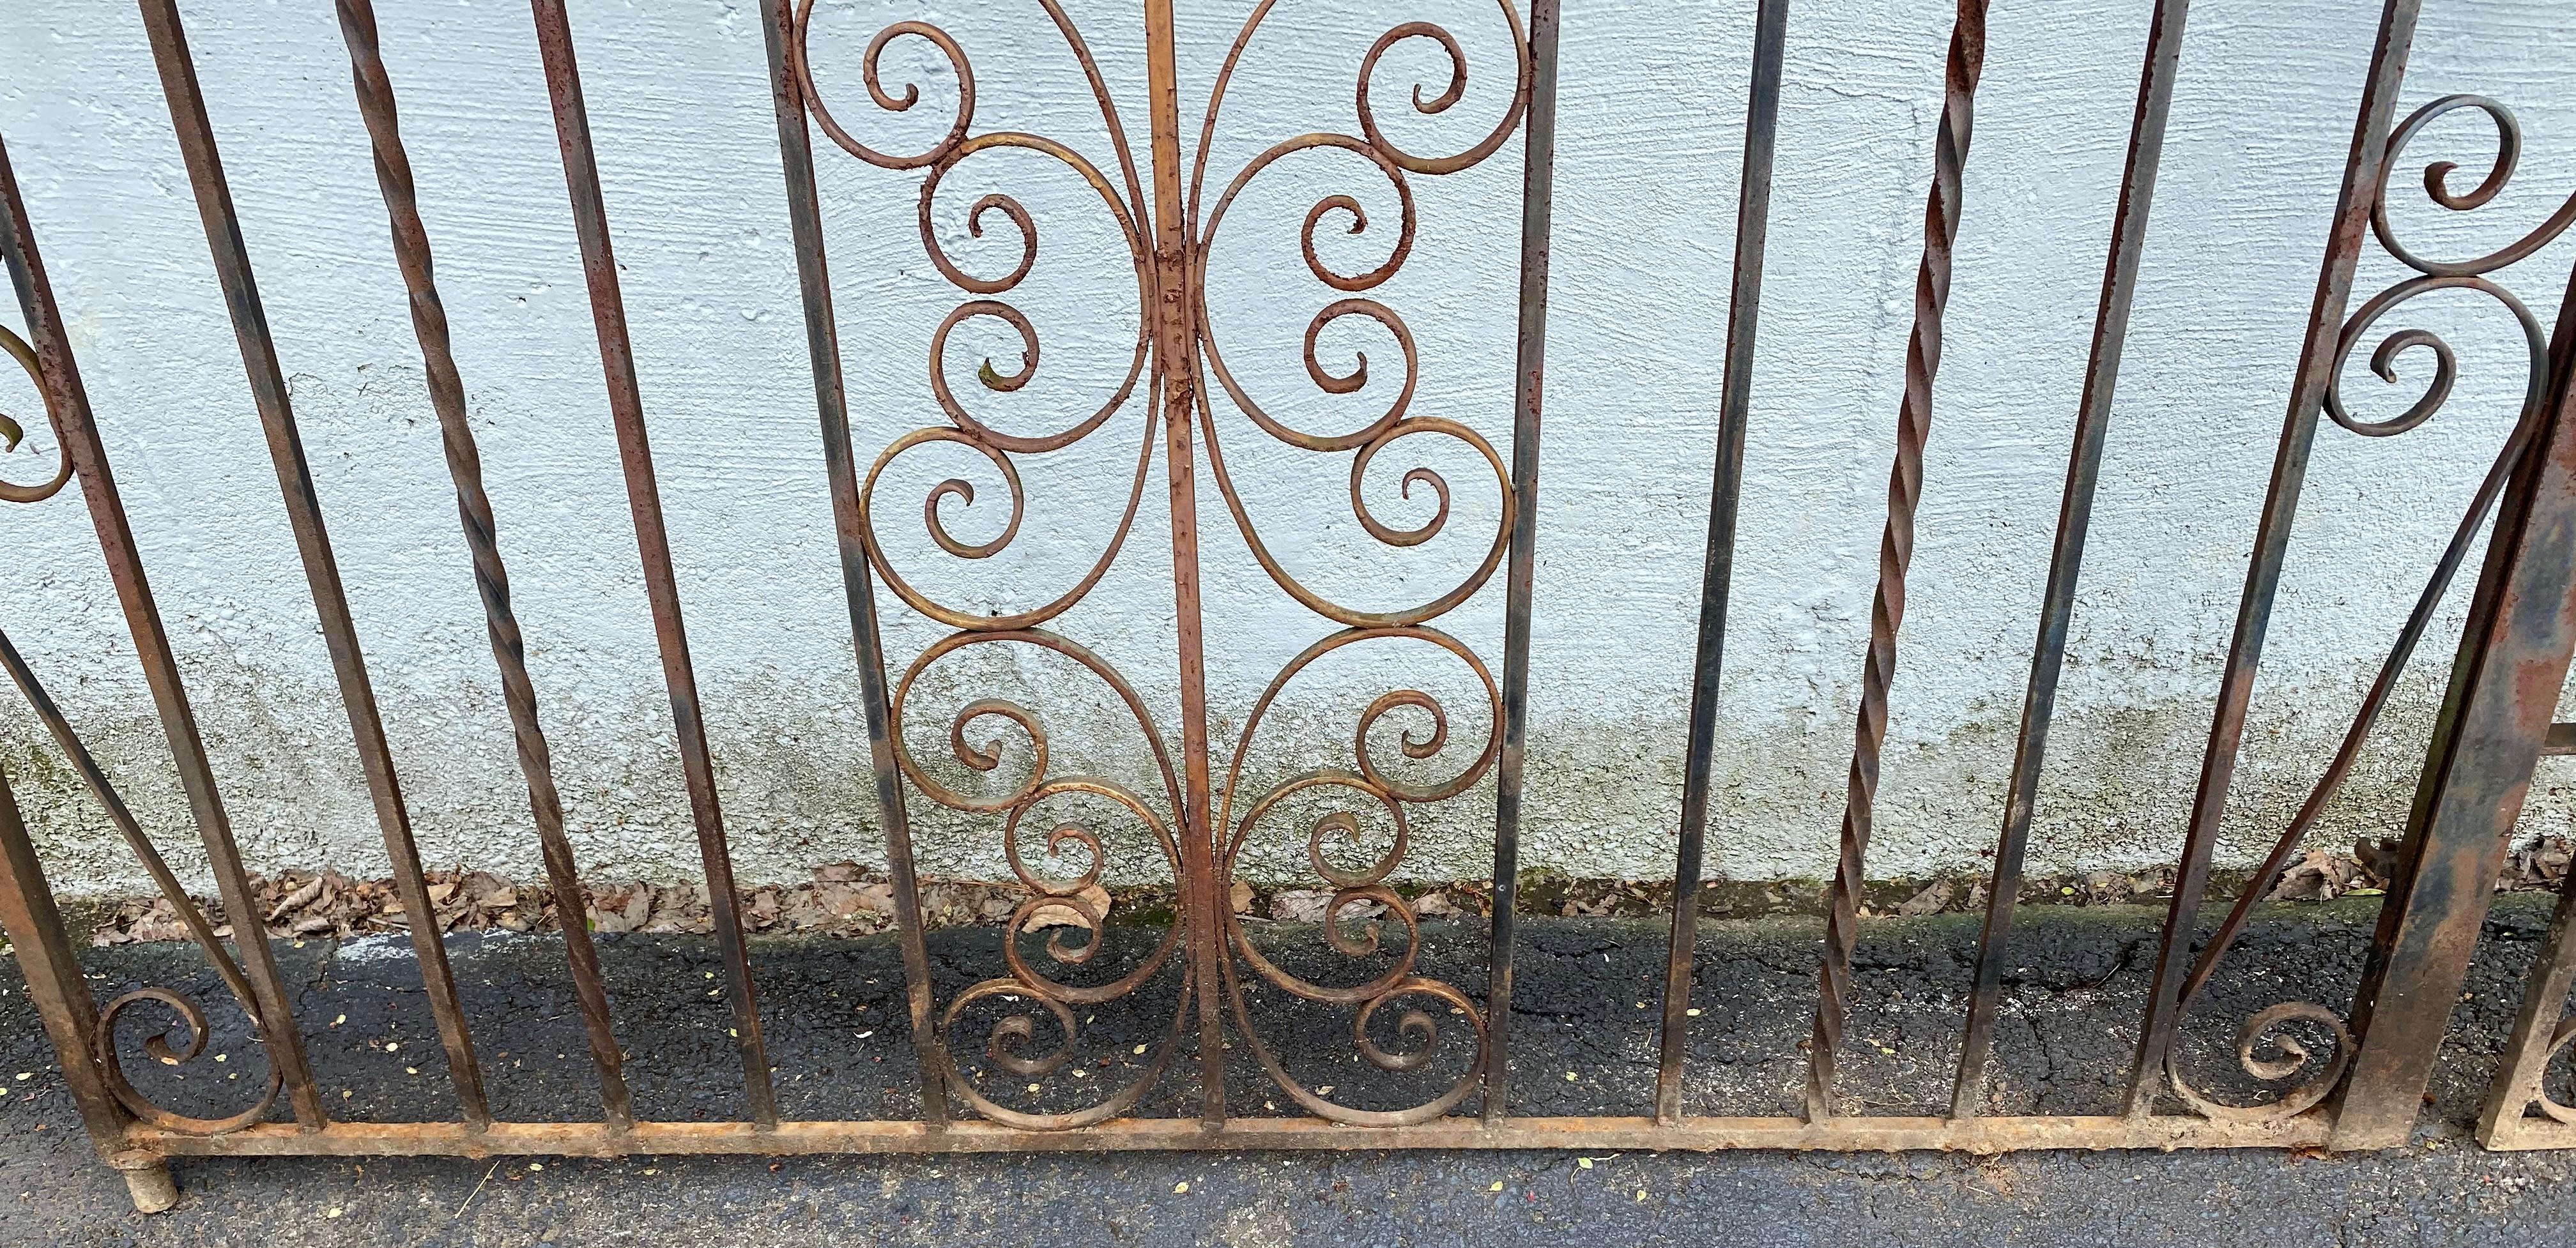 Pair of Iron Gates with Scrollwork Design For Sale 8